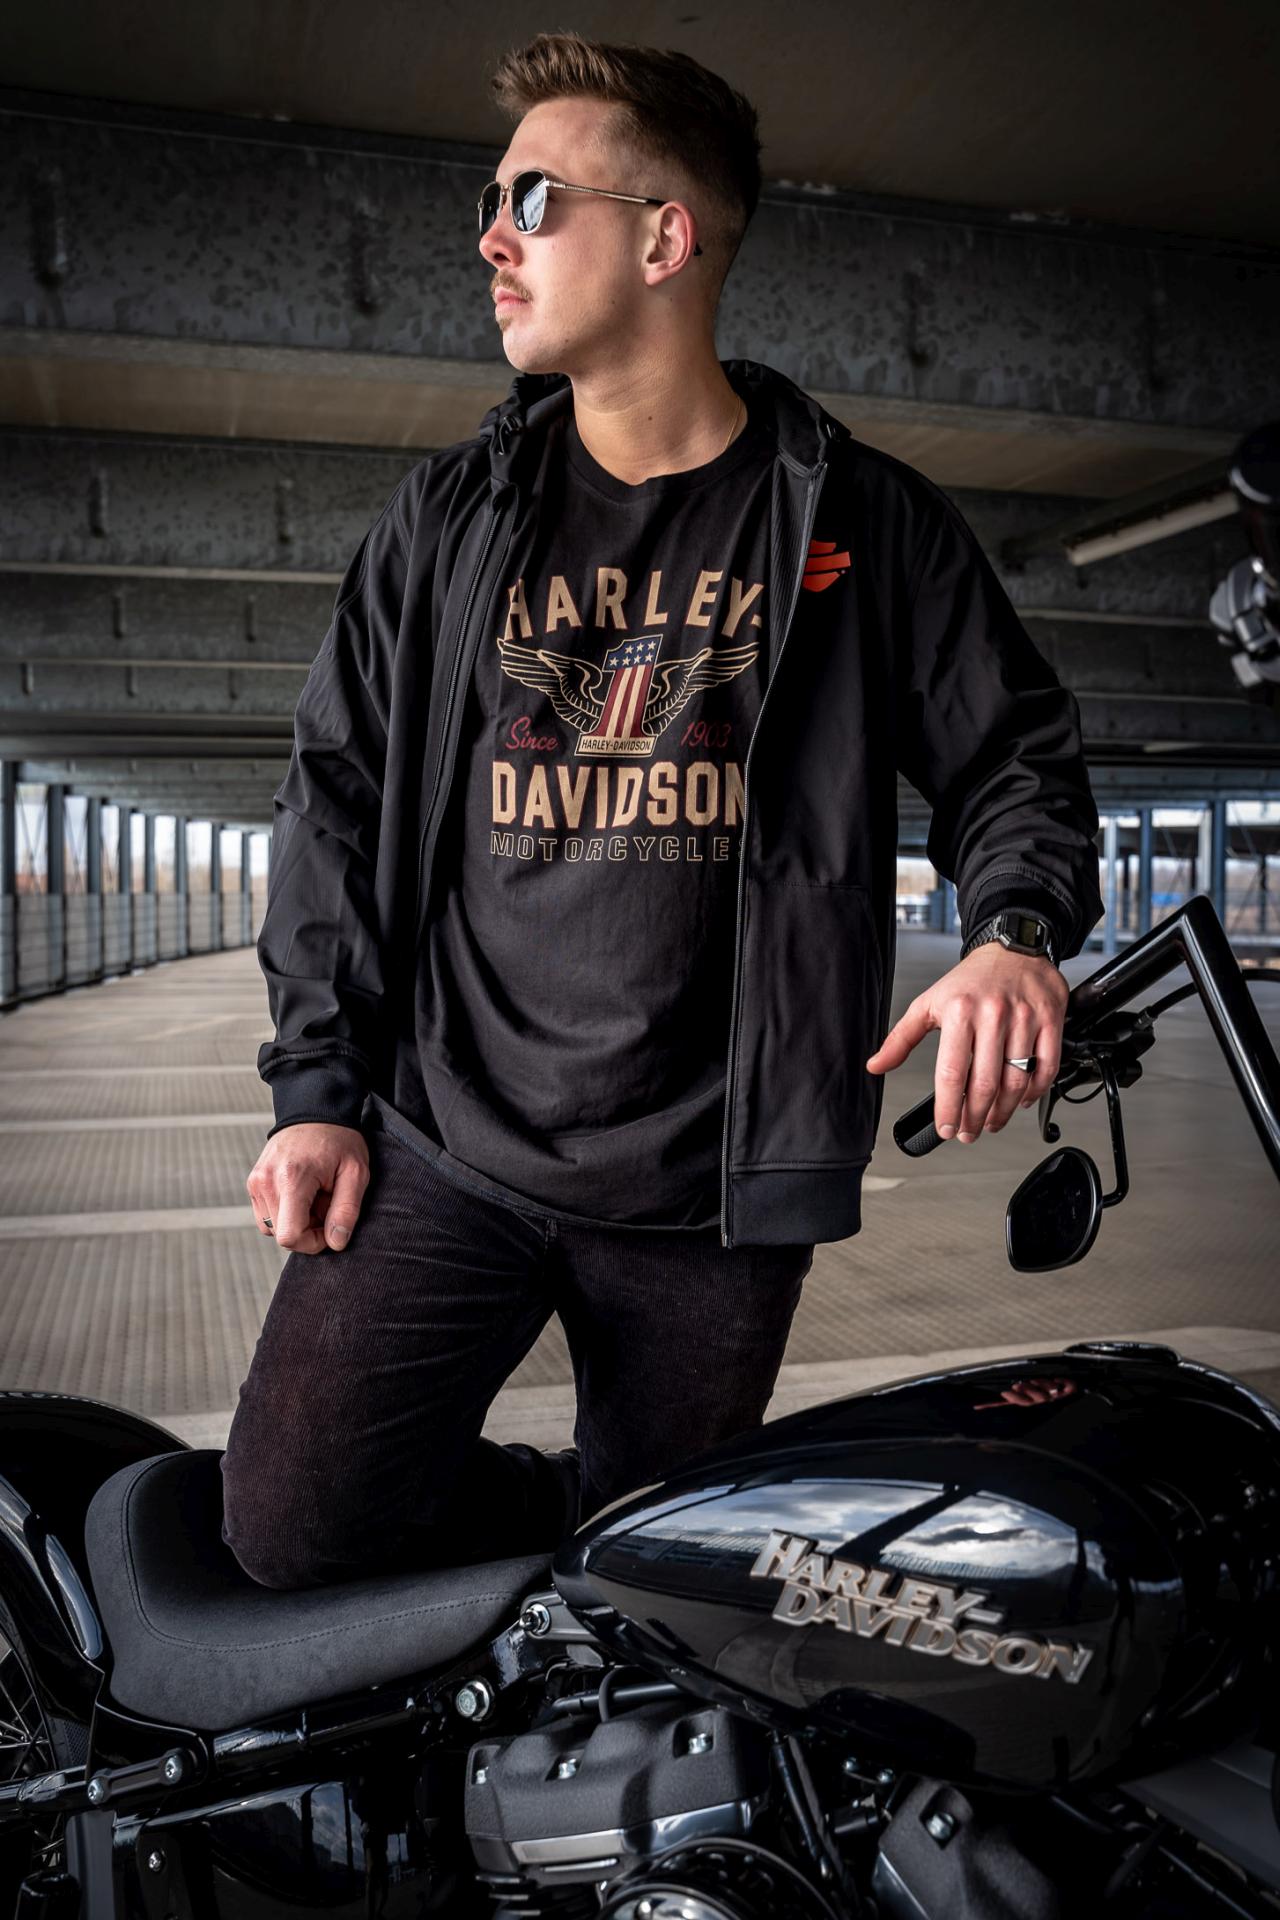 Check Our Store Bobberbrothers Com Bobberbrothers Bobber Motorcycle Gear Shirt Motorcycle T Biker Outfit Motorcycle Outfit Classic Harley Davidson